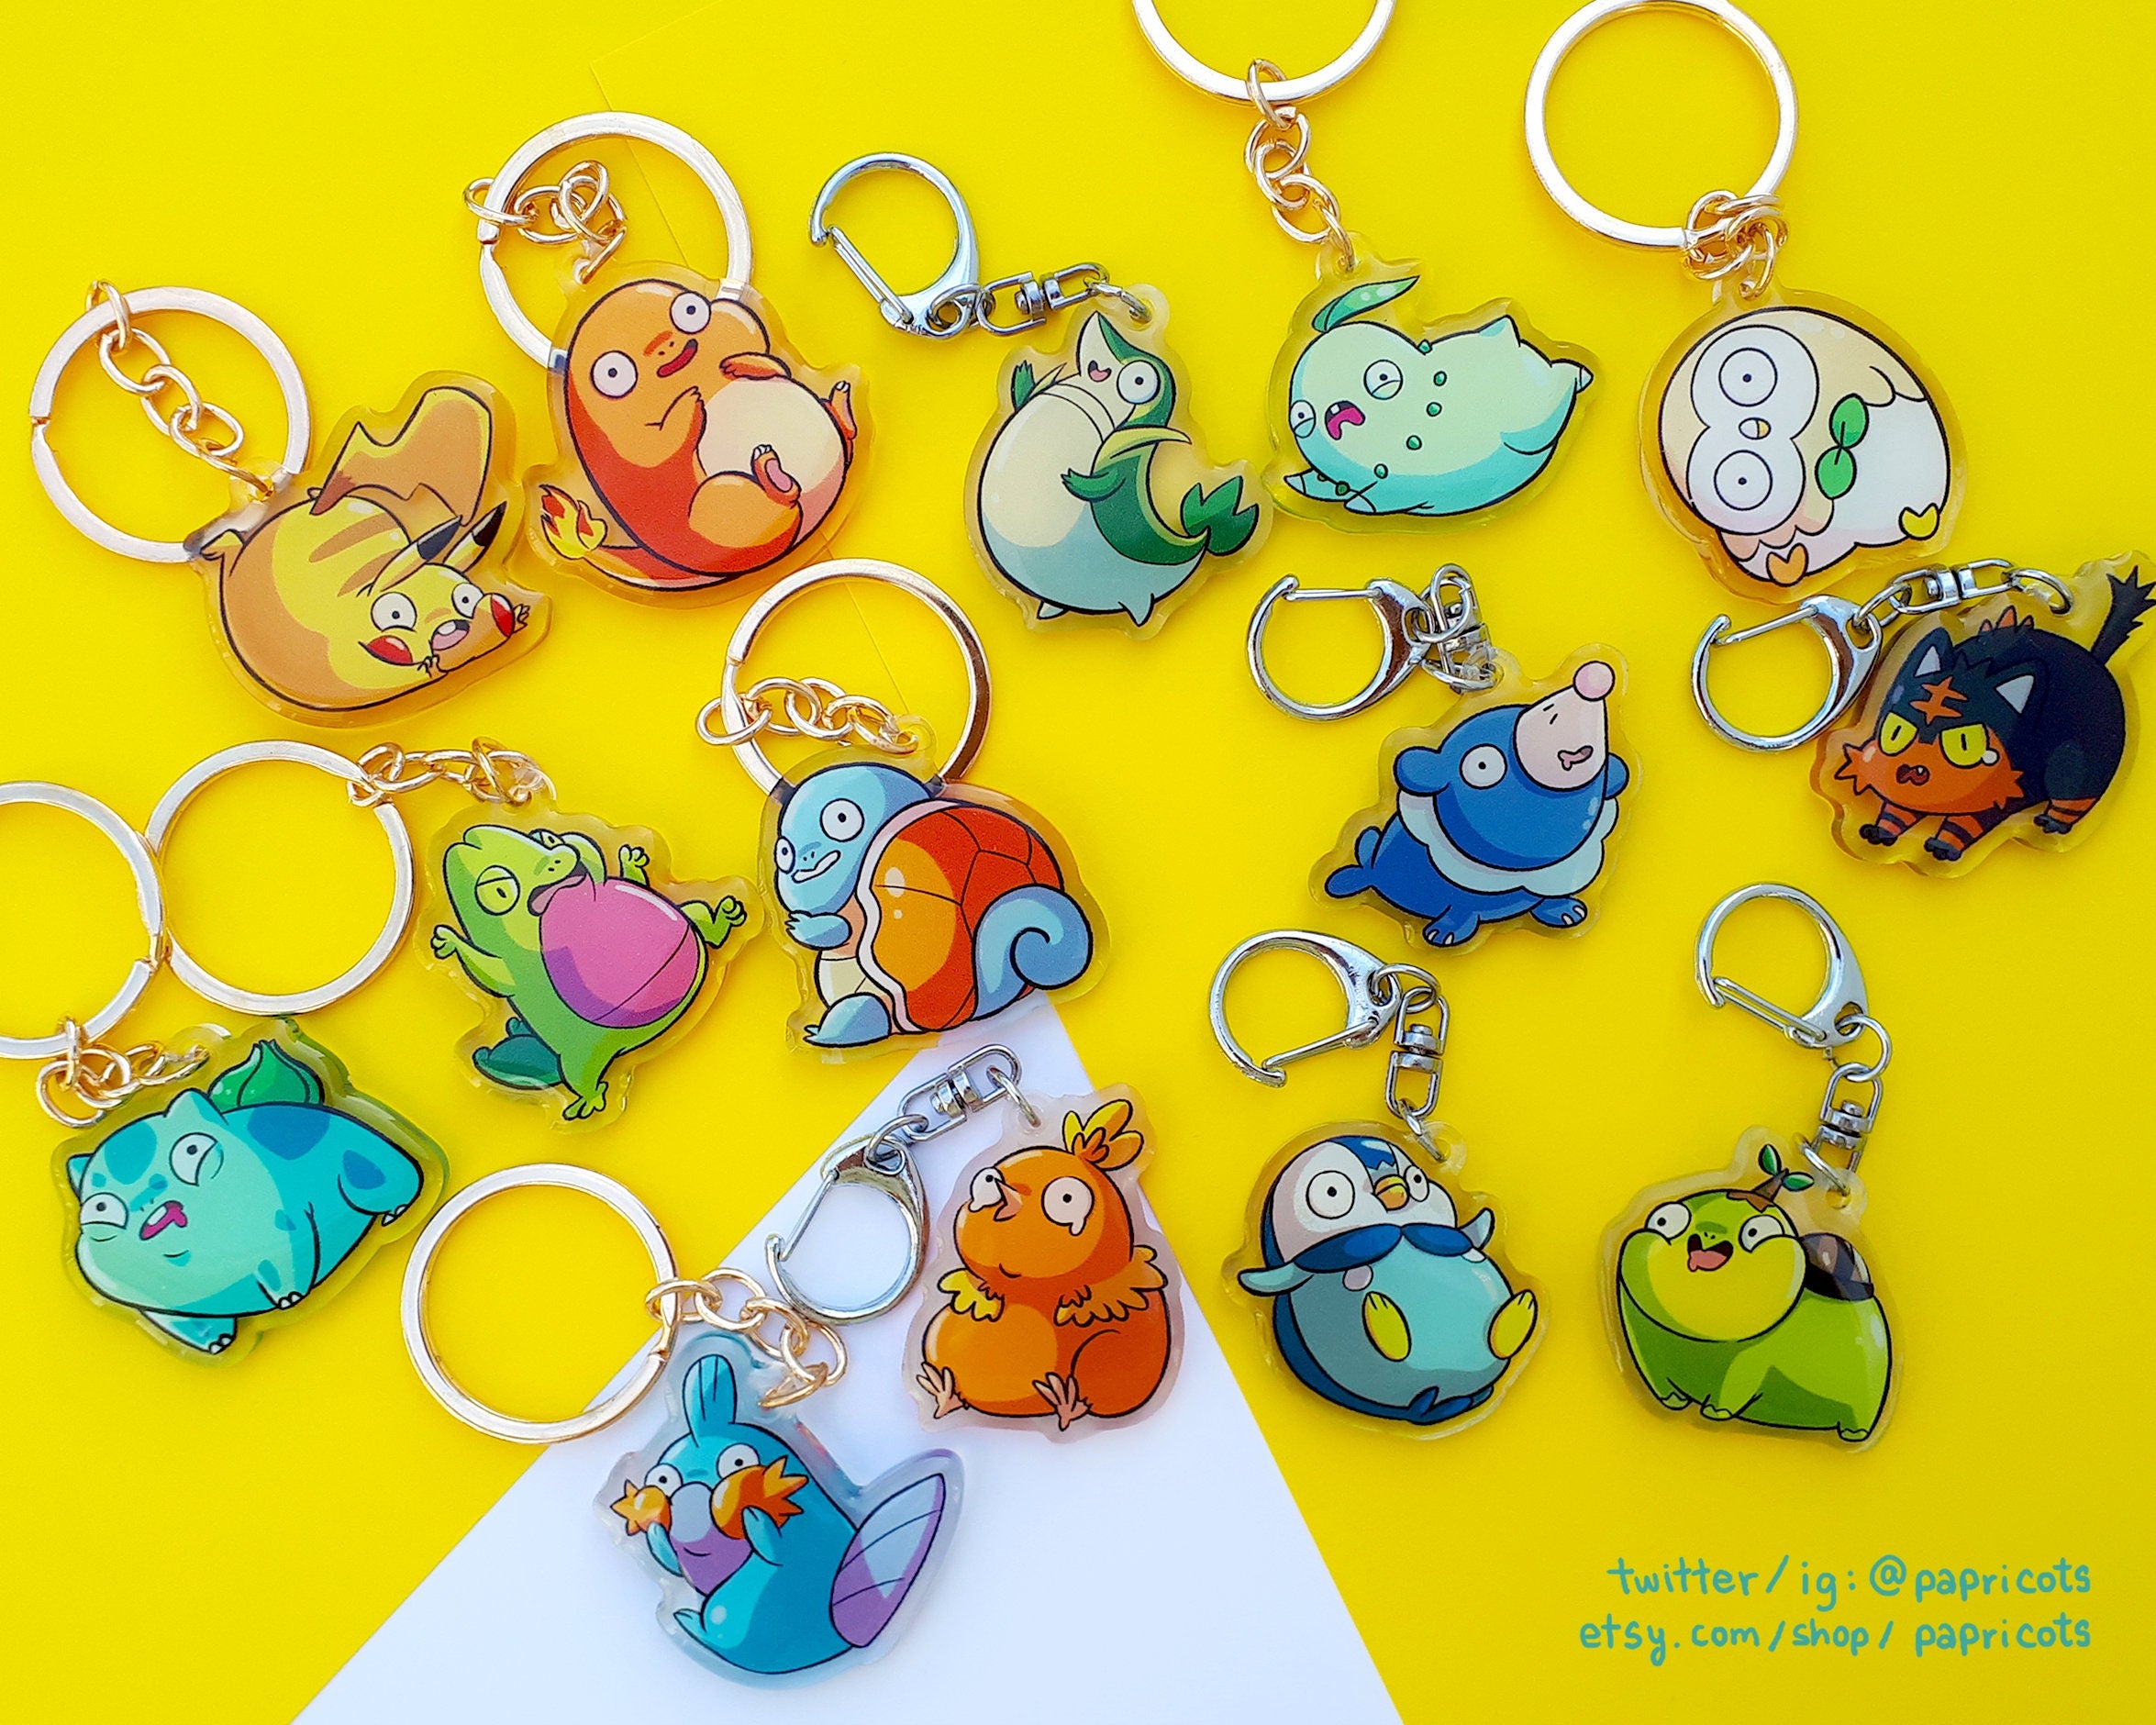 [Papricots] chubby starter keychains